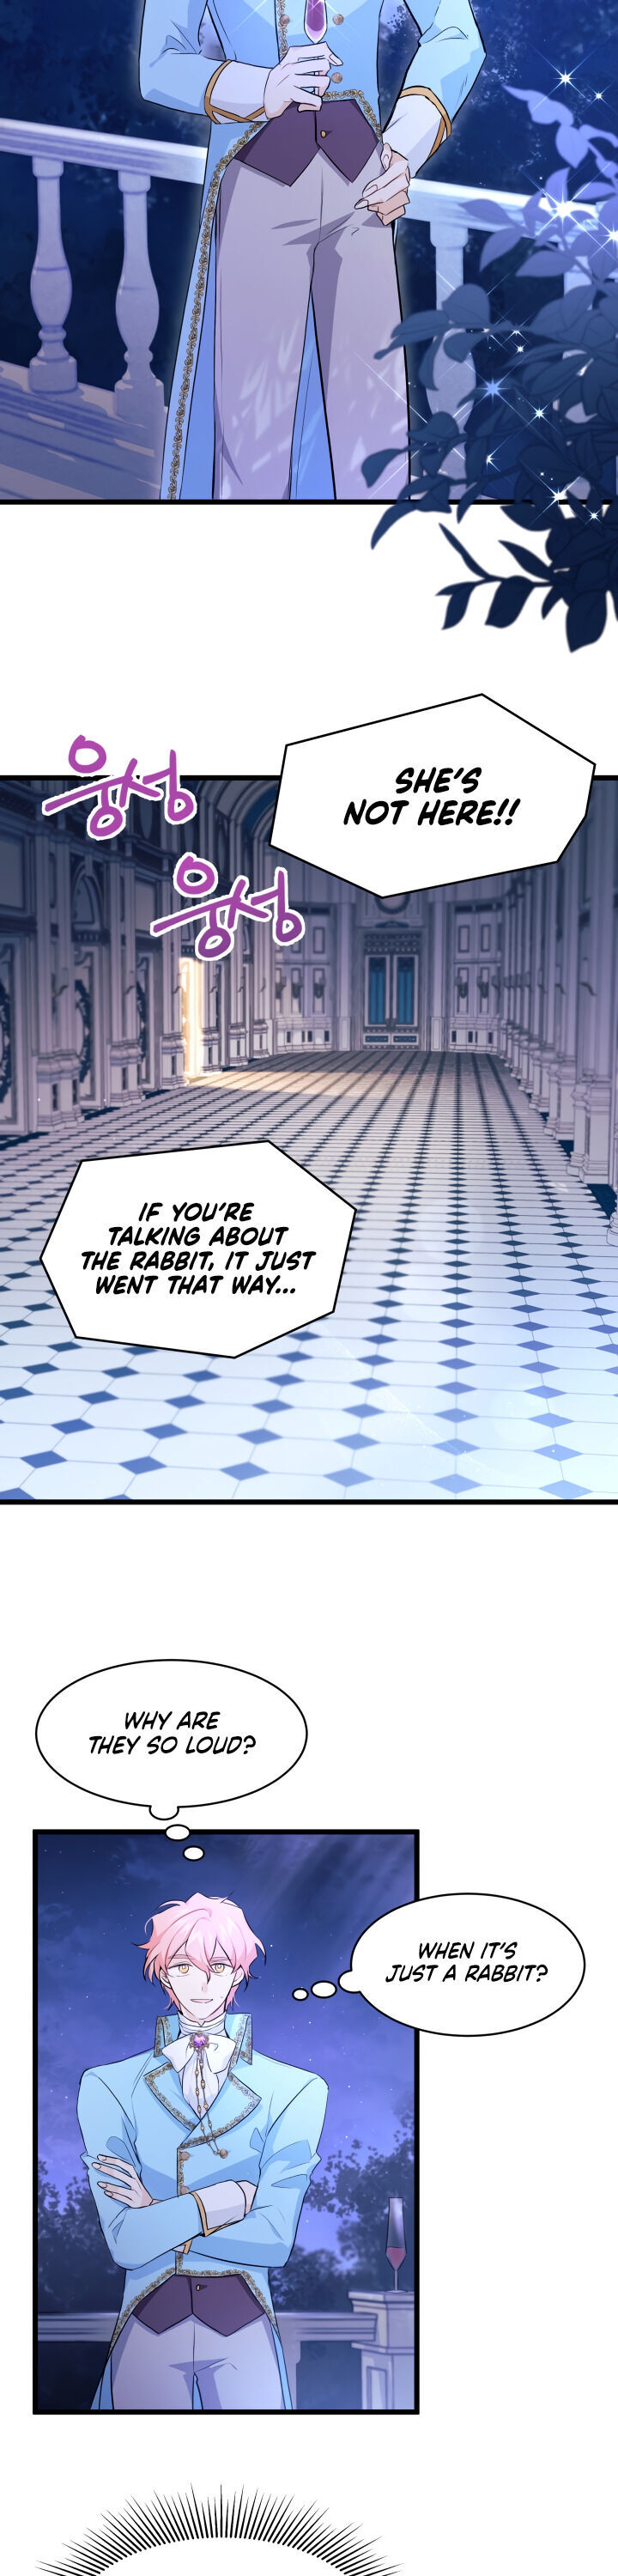 A Symbiotic Relationship Between A Rabbit And A Black Panther - Chapter 20 Page 5